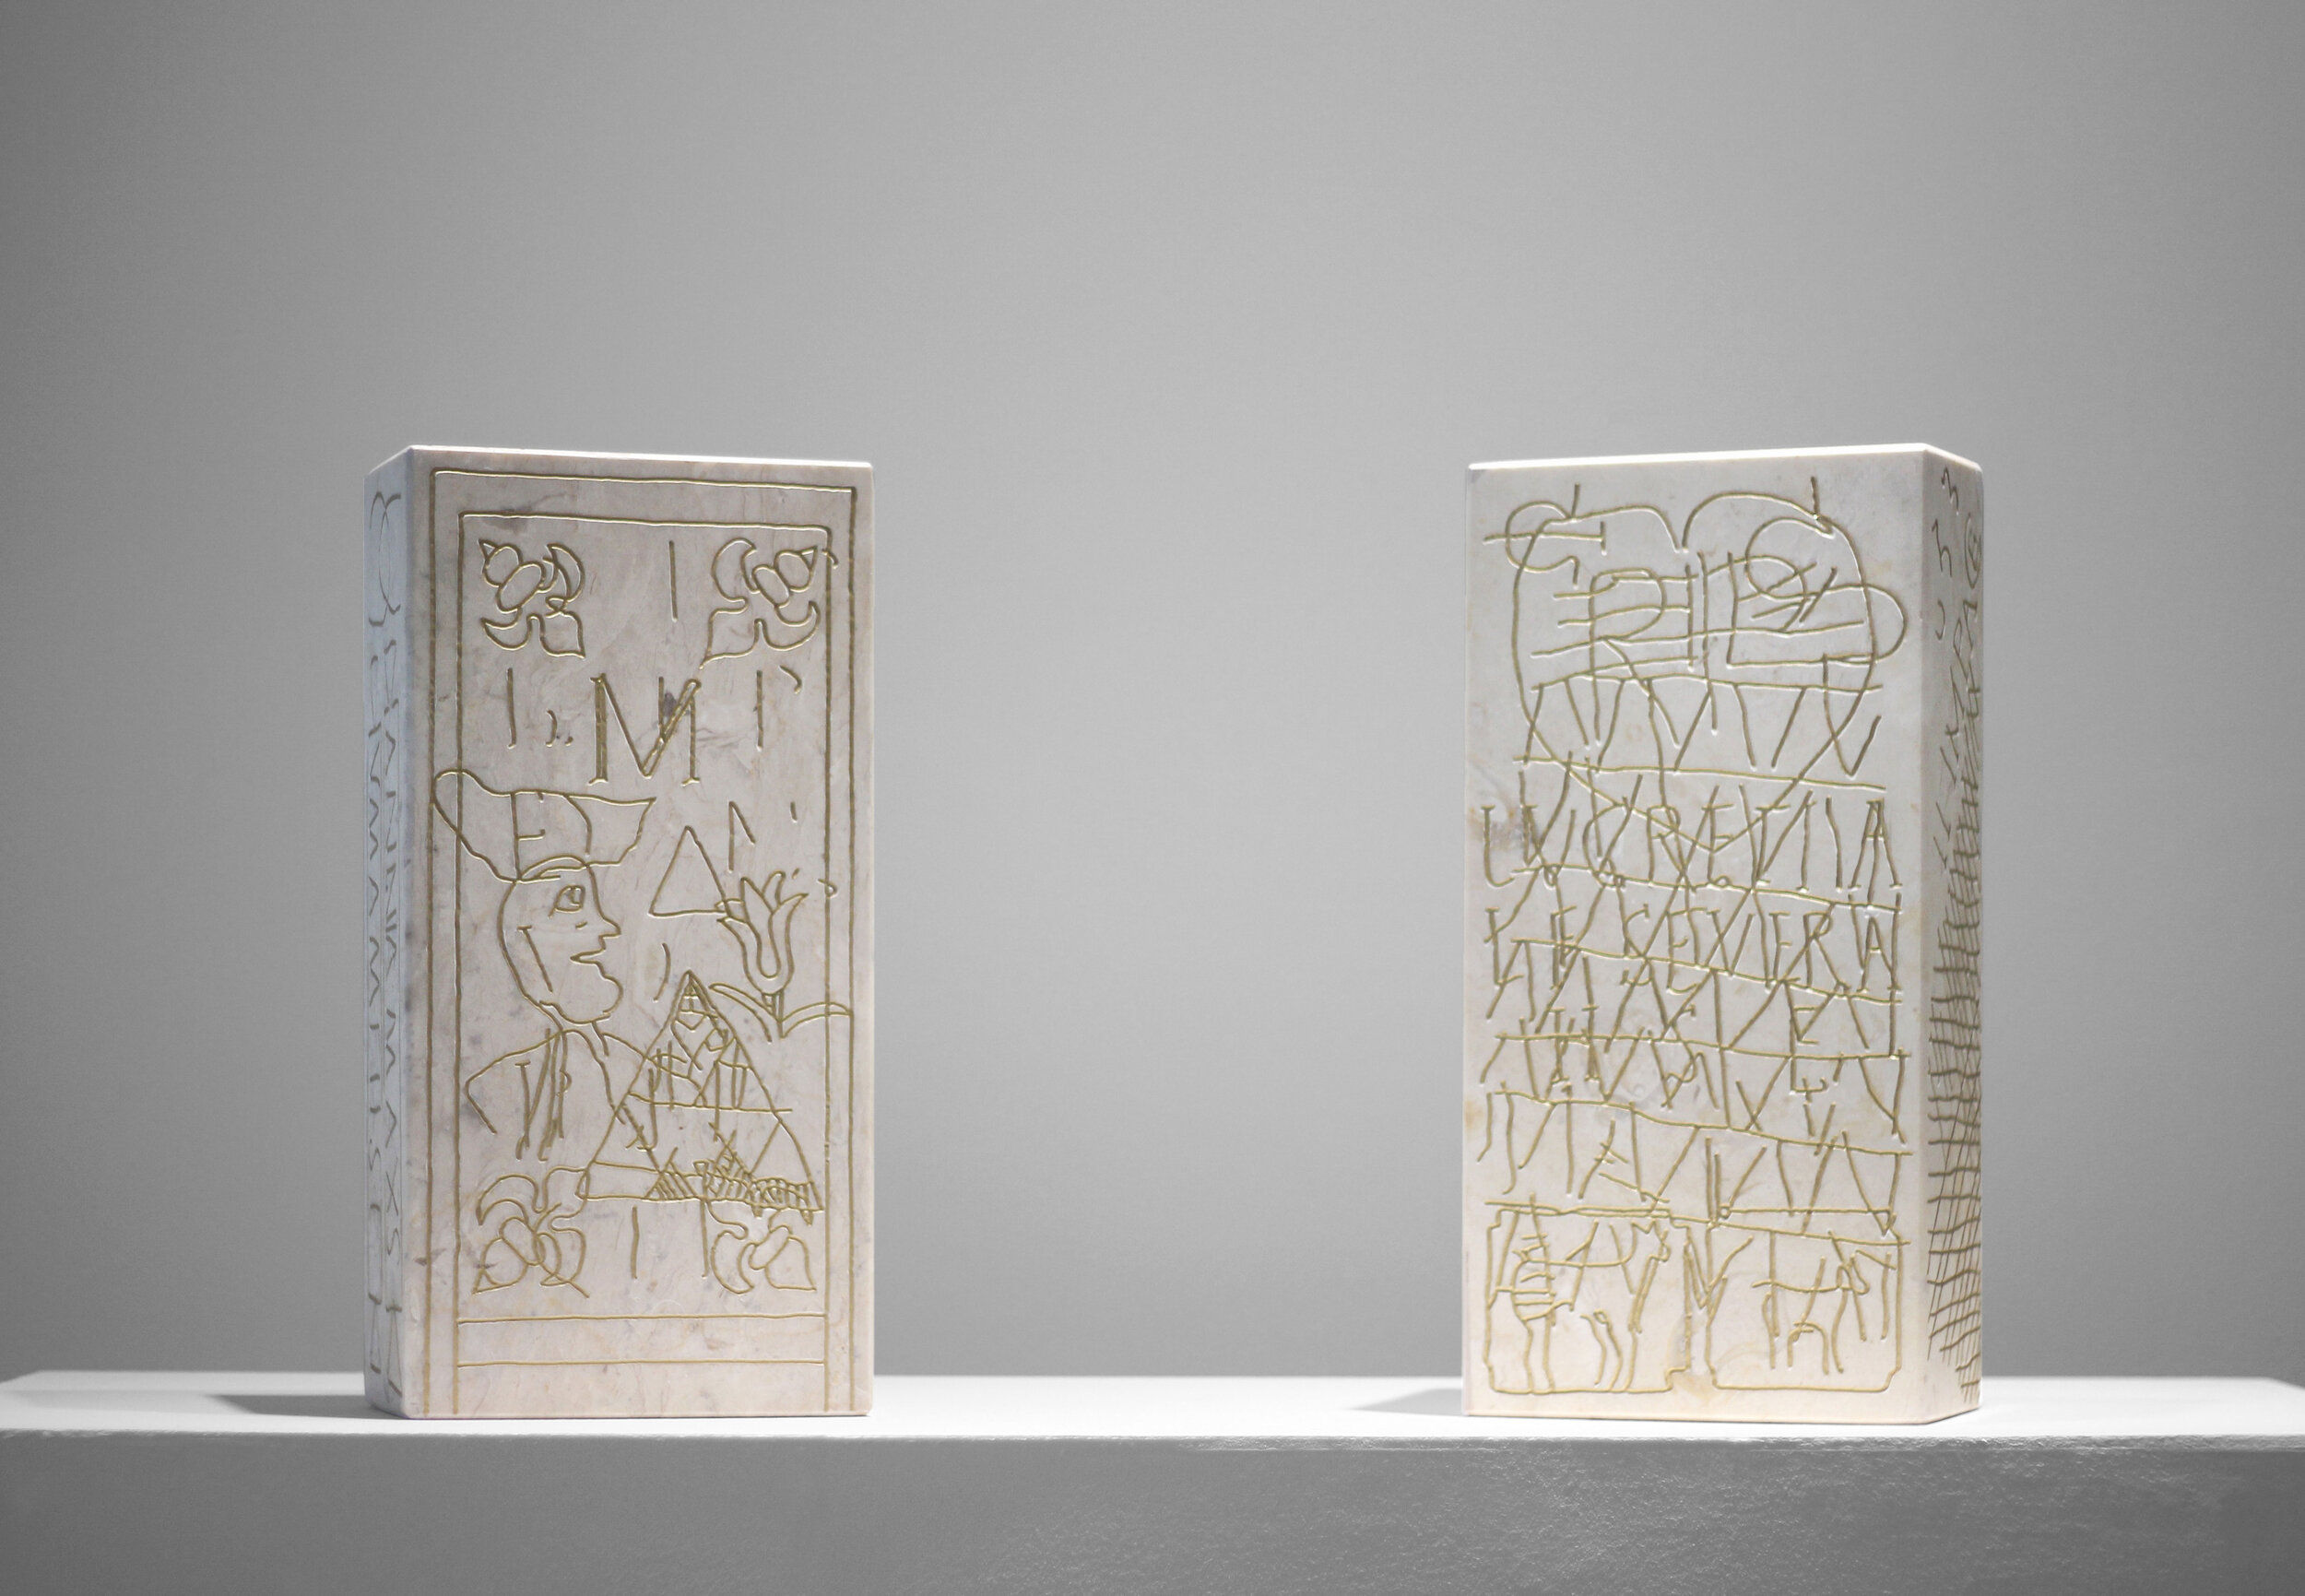    The bones that await yours (Ex-Voto 2)    &amp;&nbsp;   To the goddess, willingly and with reason (Ex-Voto 1)  , 2019, limestone and ink, 40x20x10cm,  